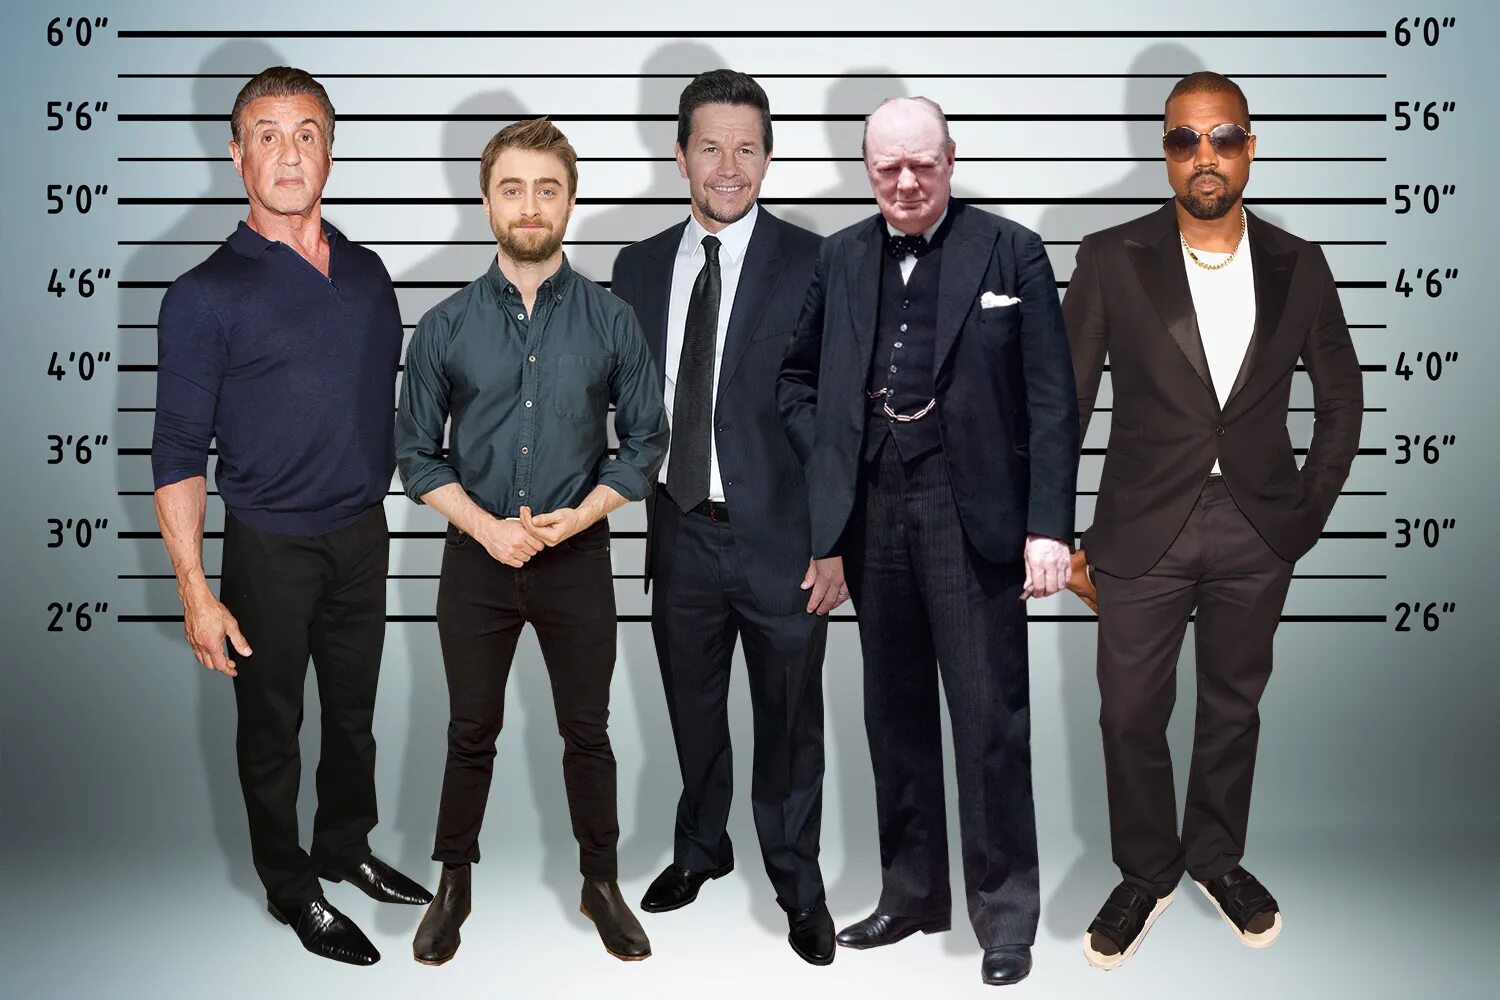 Stallone height. Рост знаменитостей. Рост знаменитостей мужчин. Знаменитости по росту.